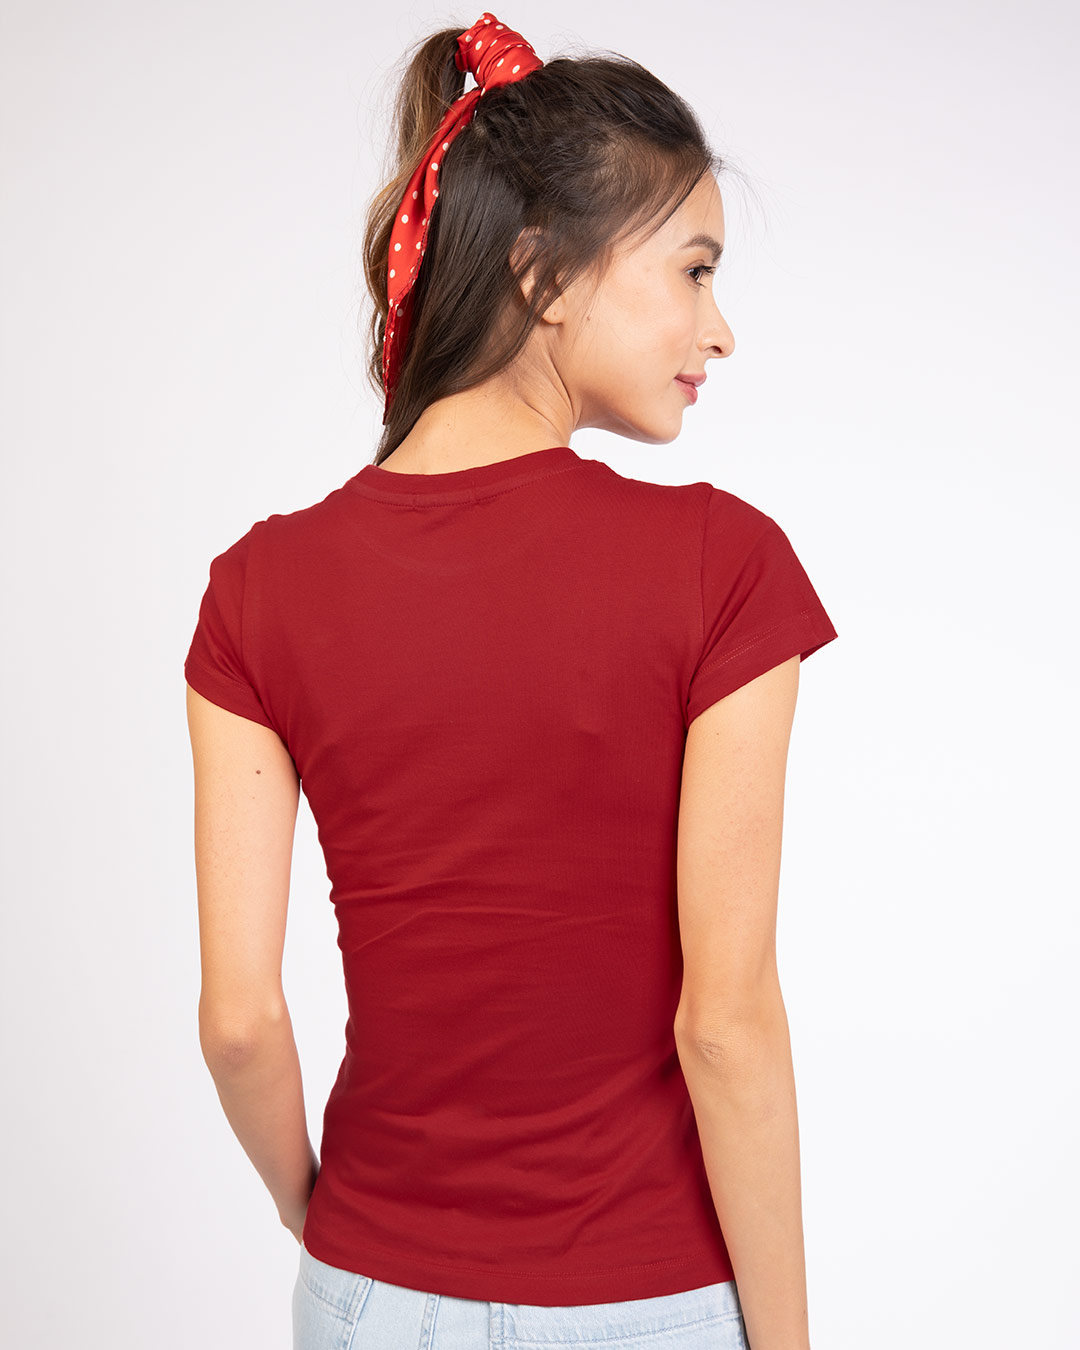 Shop Today Is A Fantastic Day Half Sleeve T-Shirt-Back